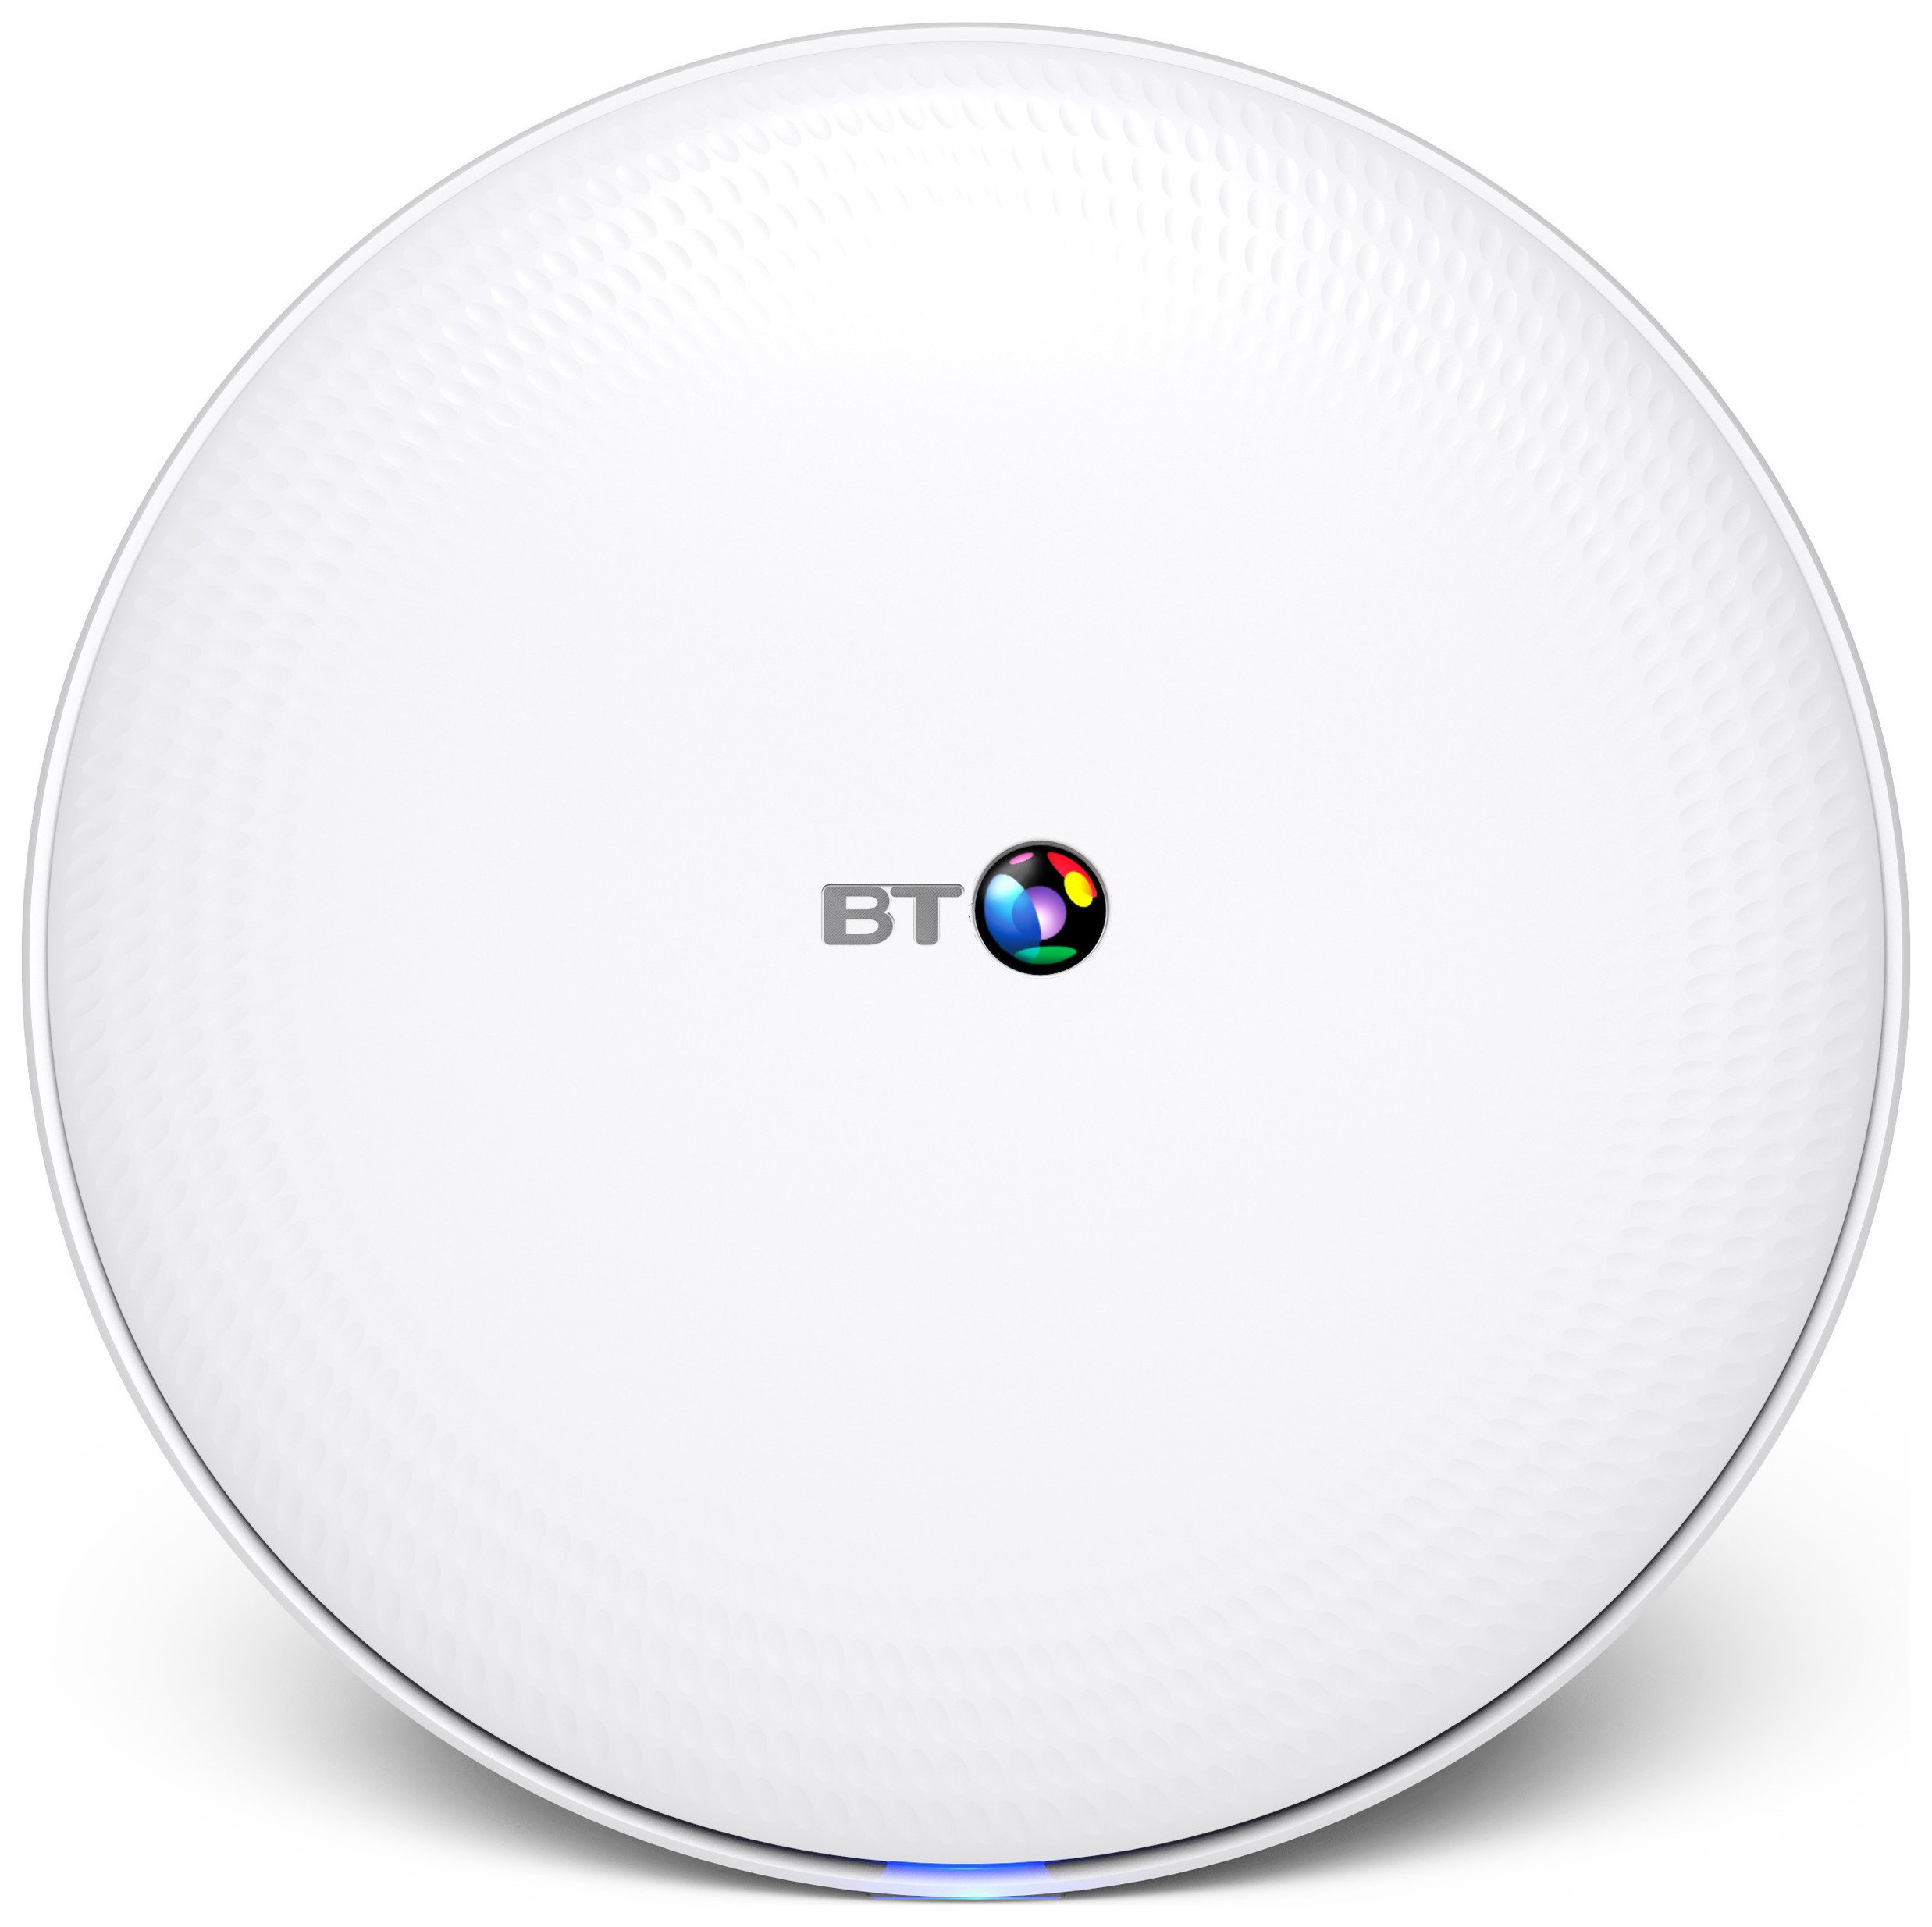 BT Whole Home Wi-Fi AC2600 Add-On Disc review